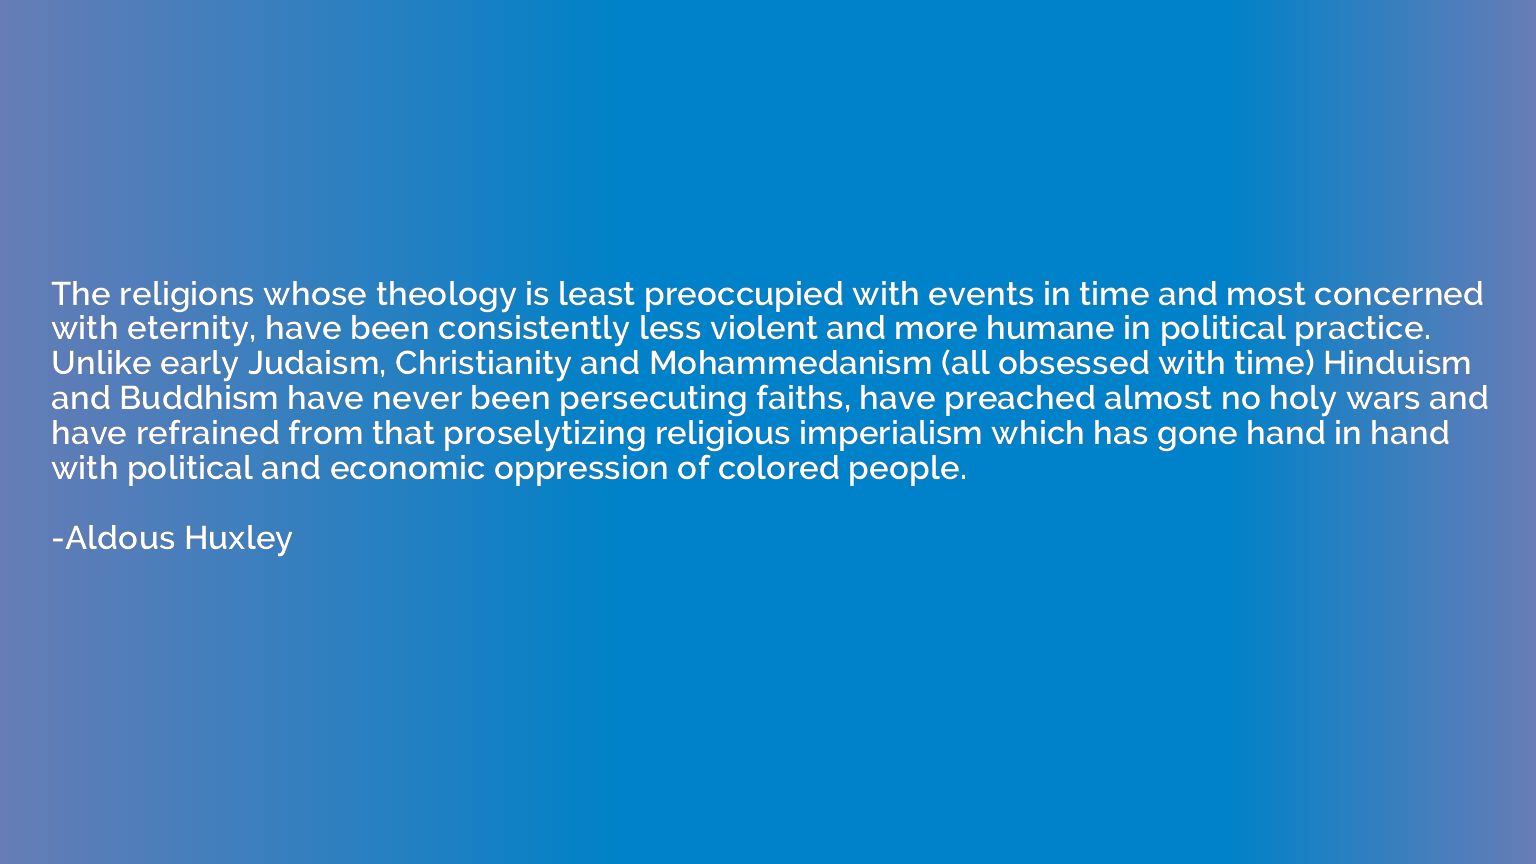 The religions whose theology is least preoccupied with event